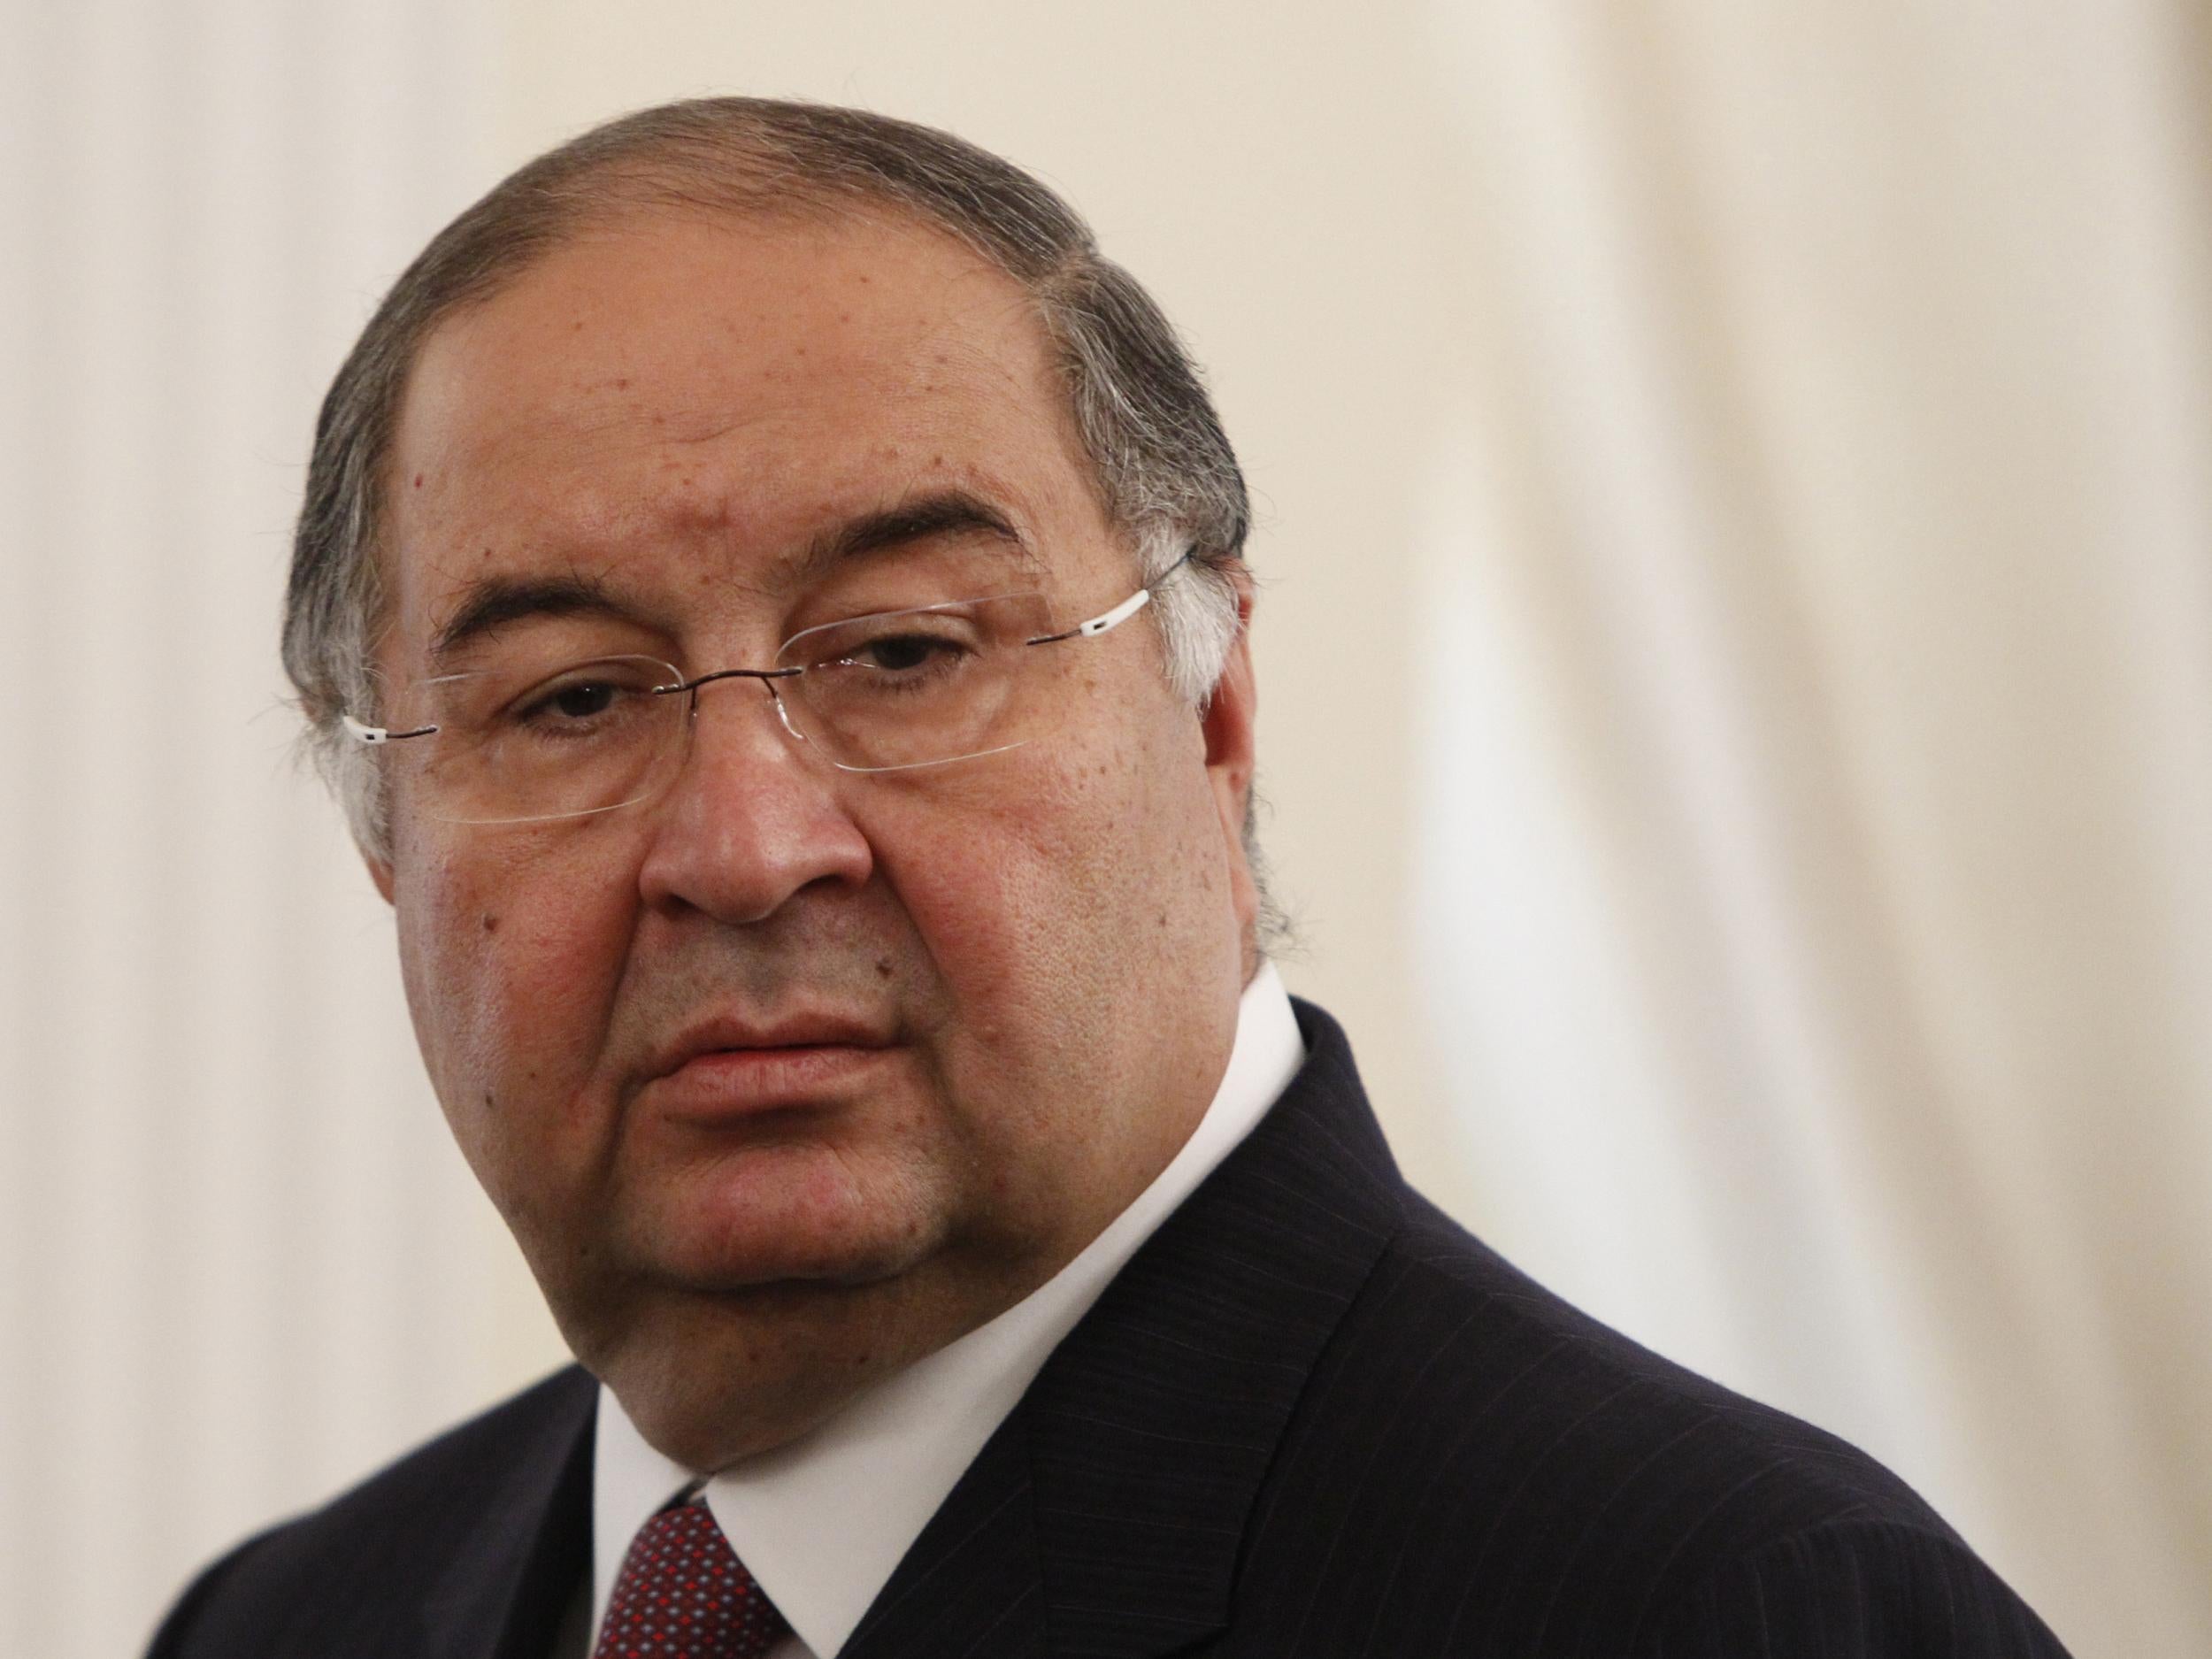 Mr Usmanov built his wealth through metal and mining but is best known as a major shareholder in Arsenal